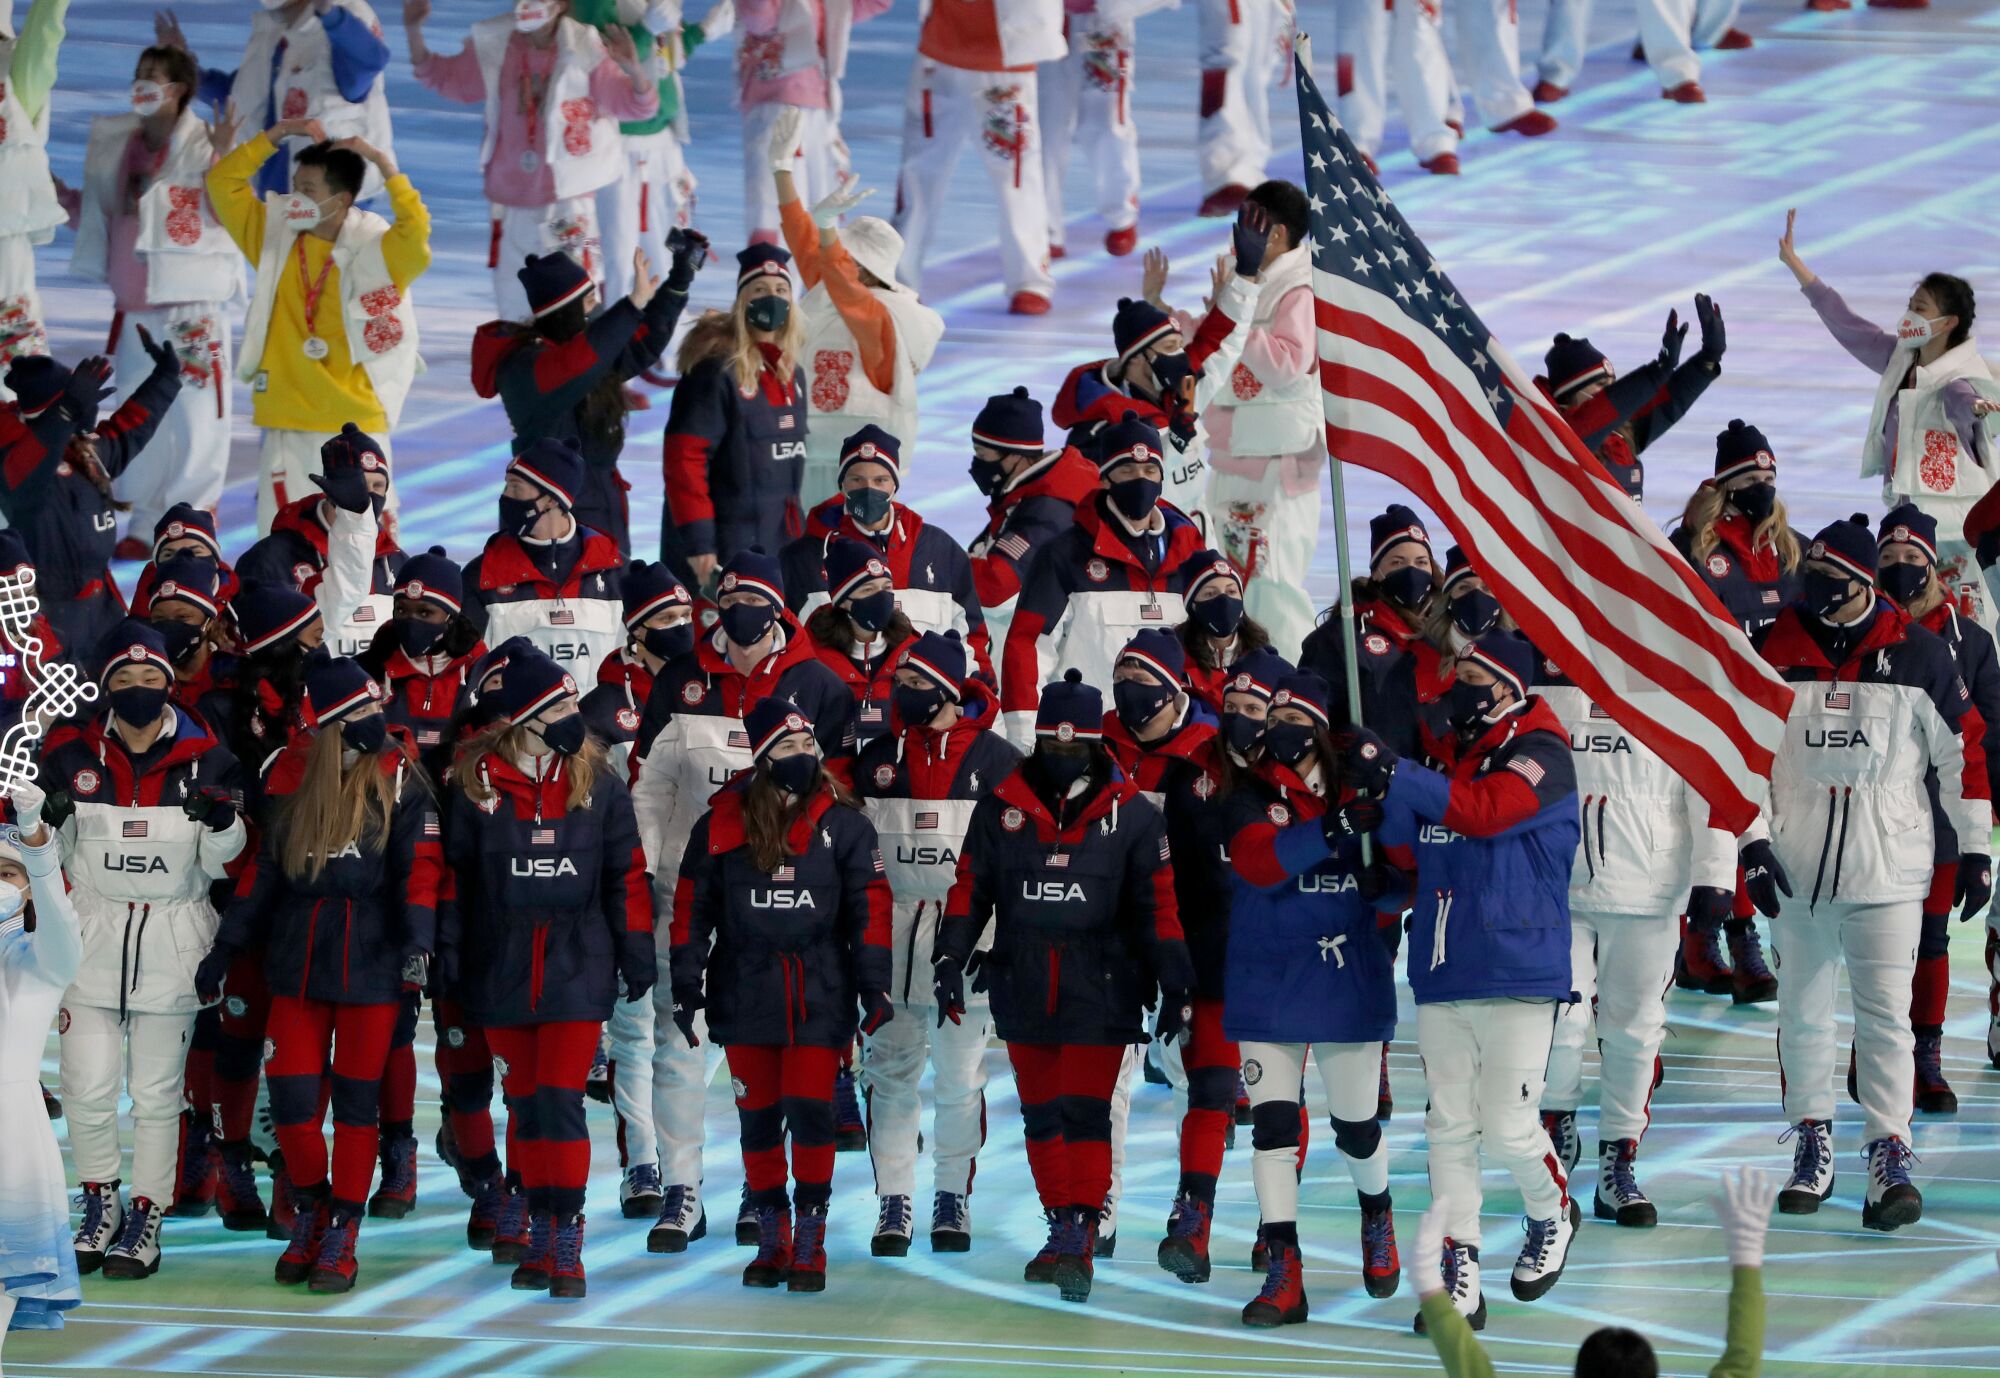 Speed skater Brittany Bowe and  curler John Shuster carry the flag for the U.S. Olympic team.